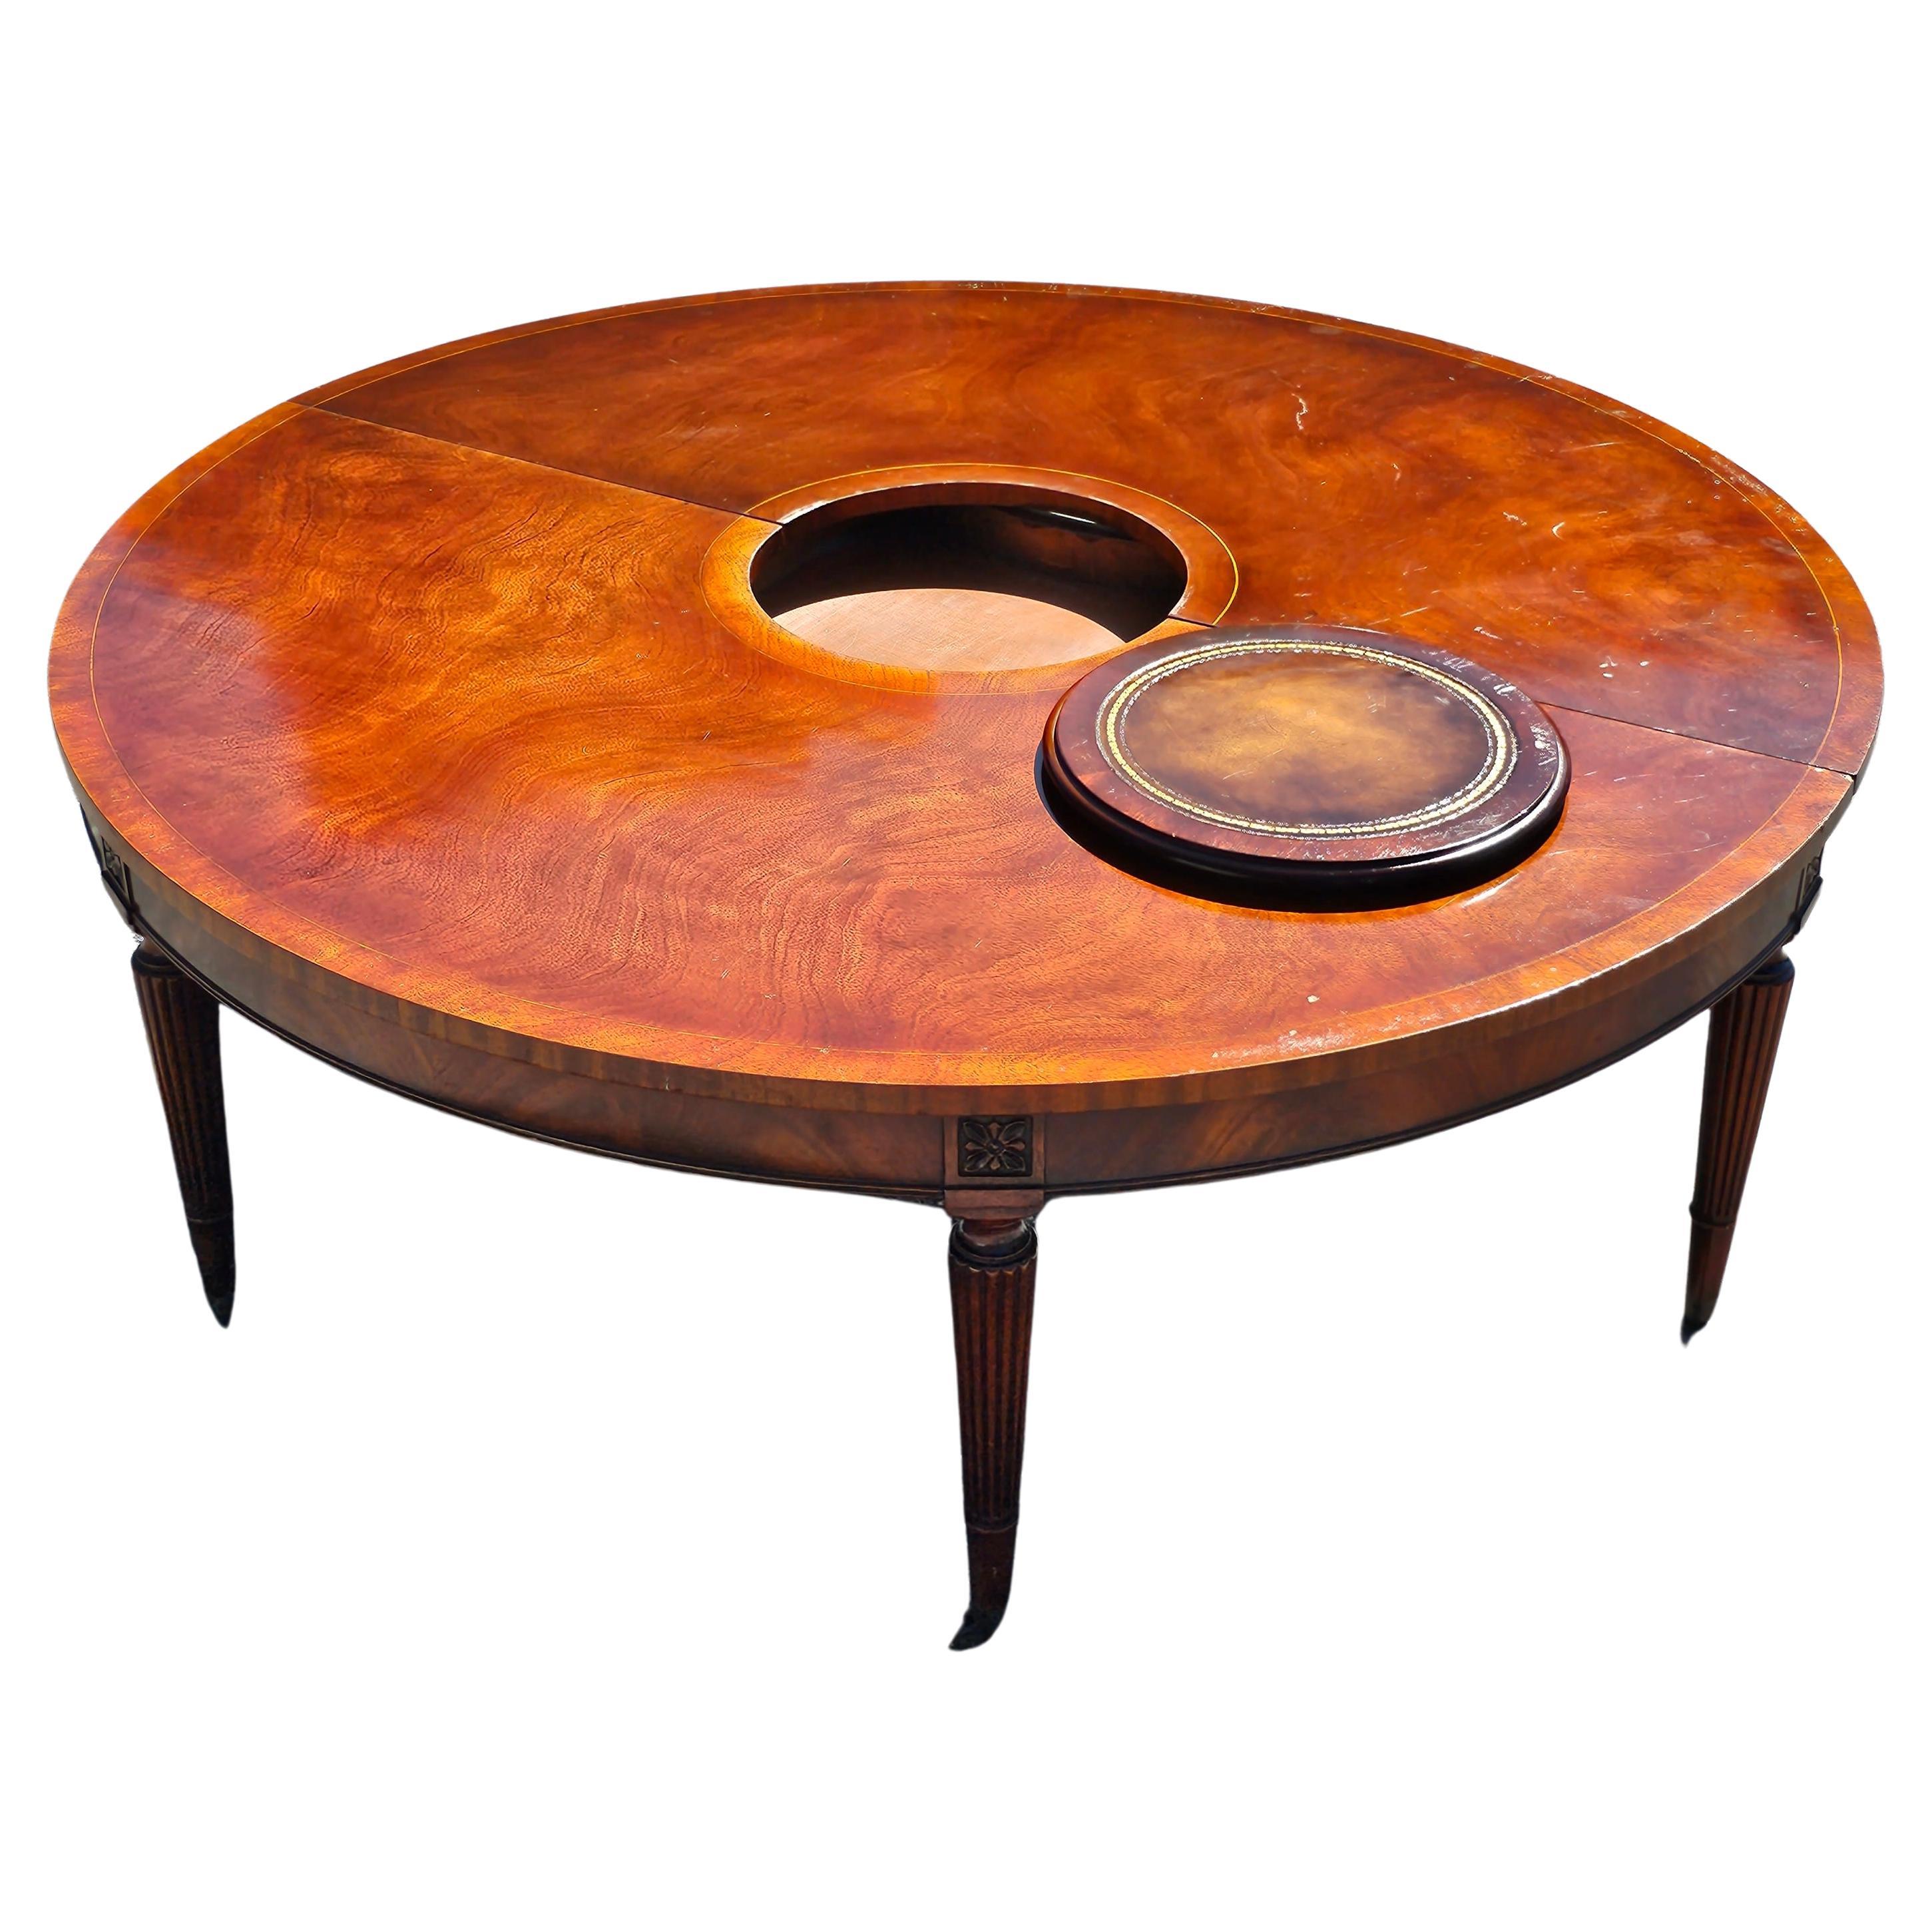 Federal 1940s Weiman Regency Tooled Leather Mahogany Convertible Demilune Cocktail Table For Sale